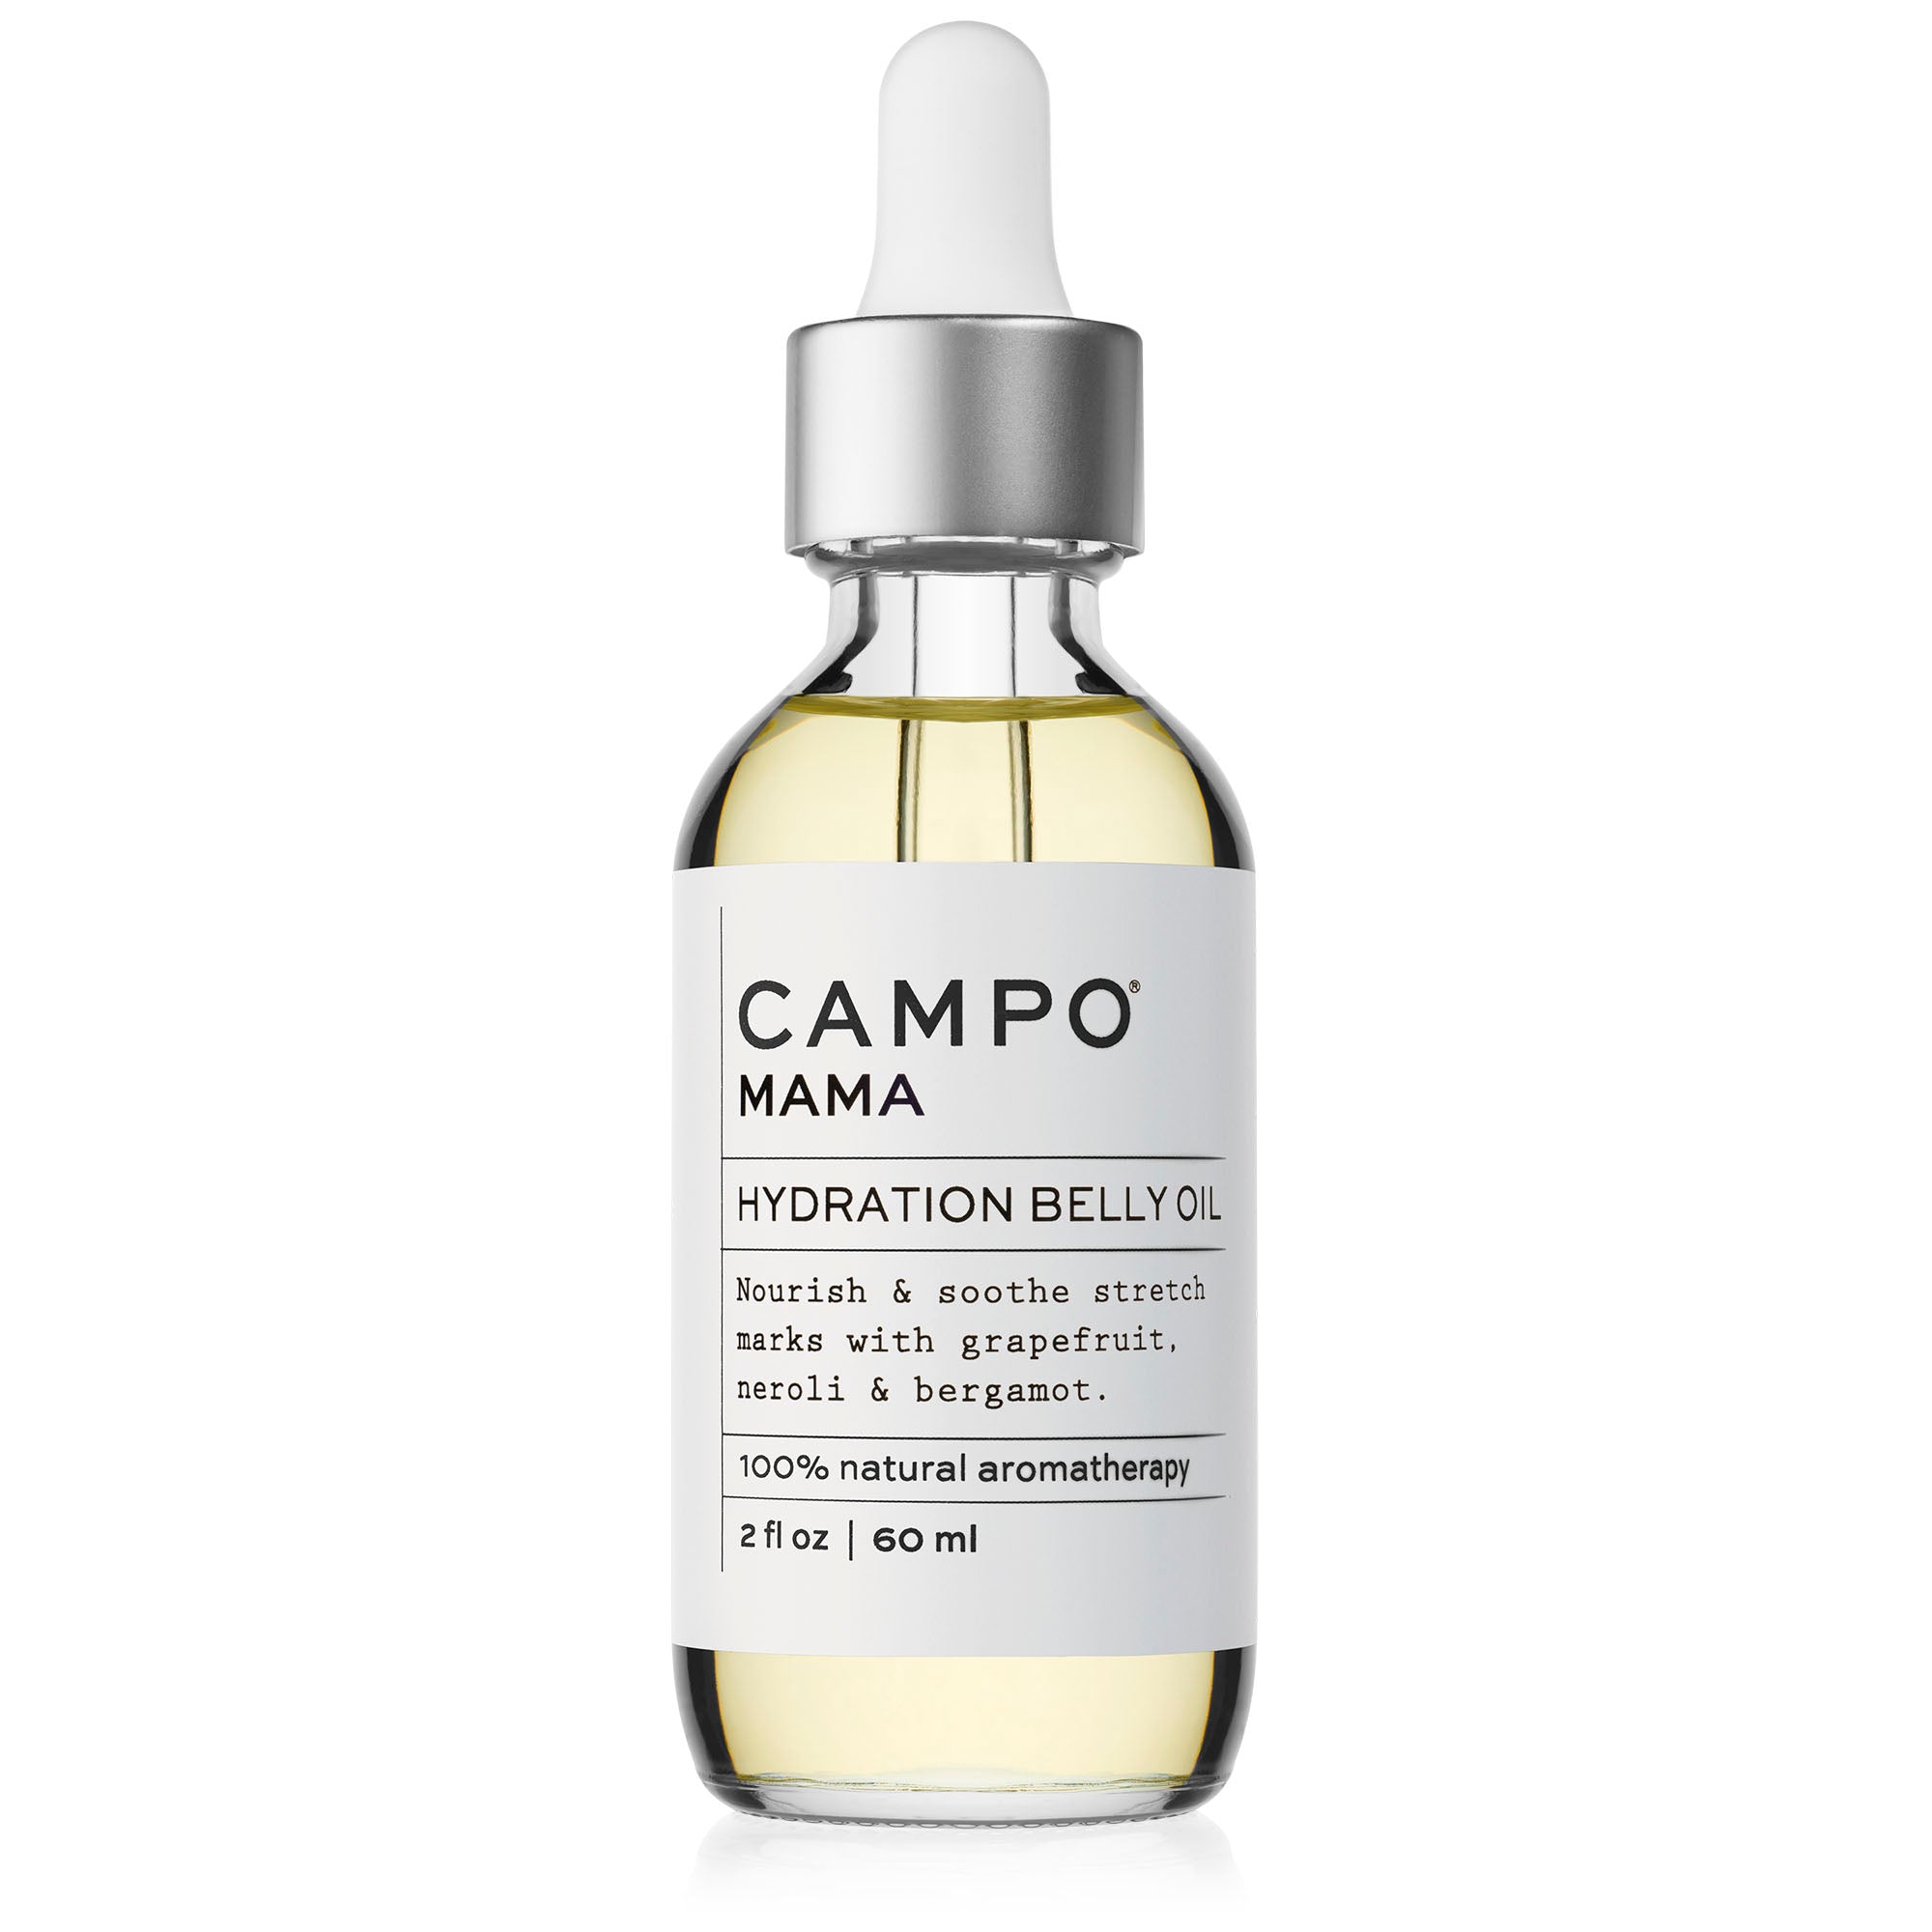 Campo Beauty Hydration Belly Oil - MAMA Stretch Mark Relief Blend that in 60 ml. Soothe sore muscles and pain. Nourish and soothe stretched skin with essential oils of grapefruit, neroli & bergamot infused in luxury vitamin-rich beauty oils of sweet almond, camellia seed, avocado, olive oil, sunflower & vitamin e. Help prevent stretch marks and give your skin an instant glow and an infusion of nourishing, deep hydration without a greasy feel. Soothe the itch.